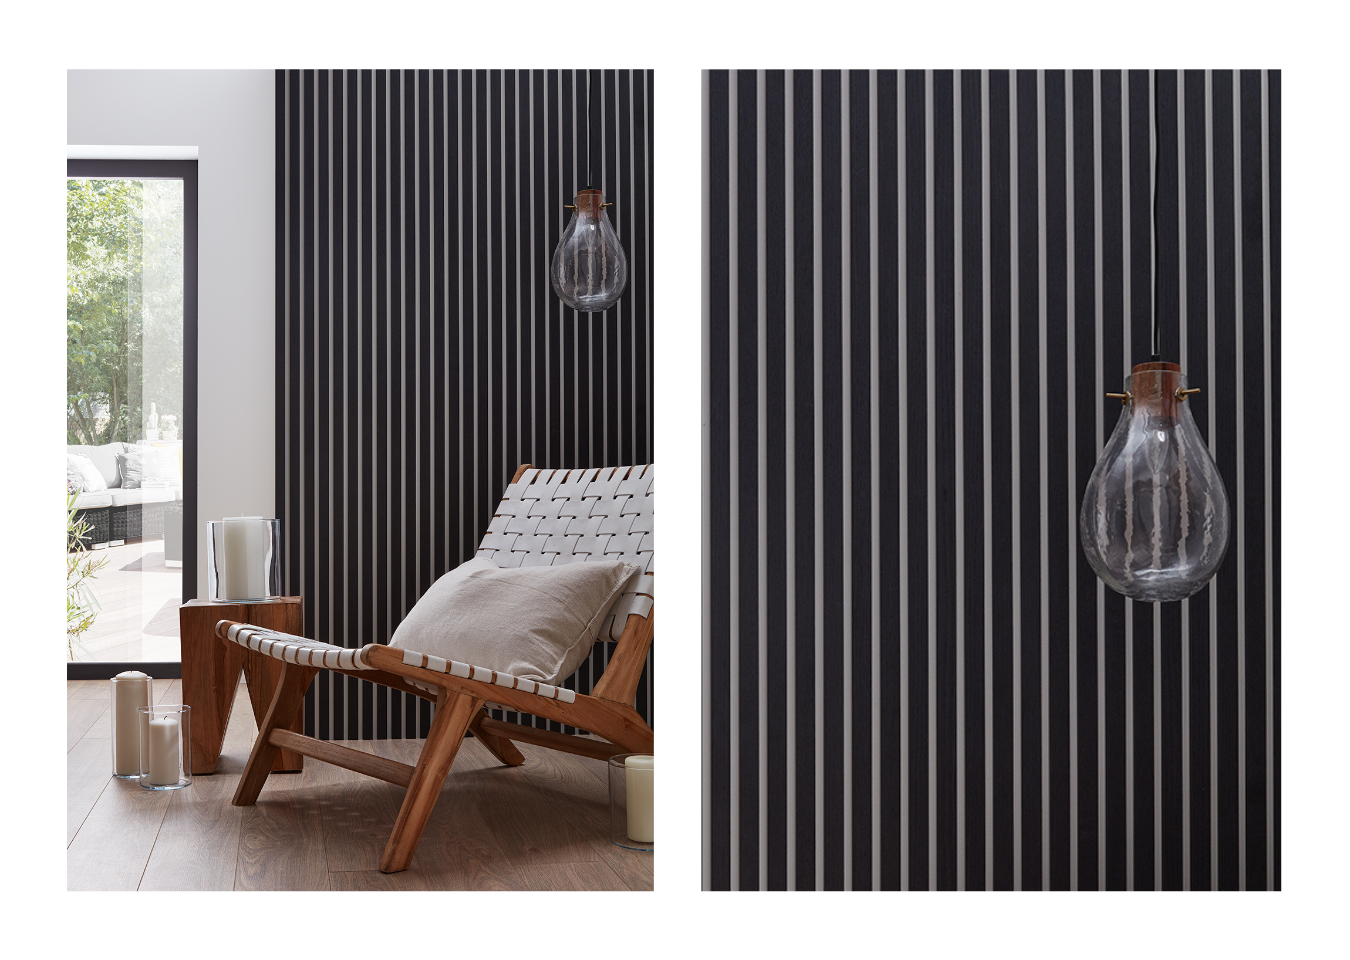 SlatWall Charcoal Black wooden slats on a wall behind a woven white chair and a brown table surrounded by candles.